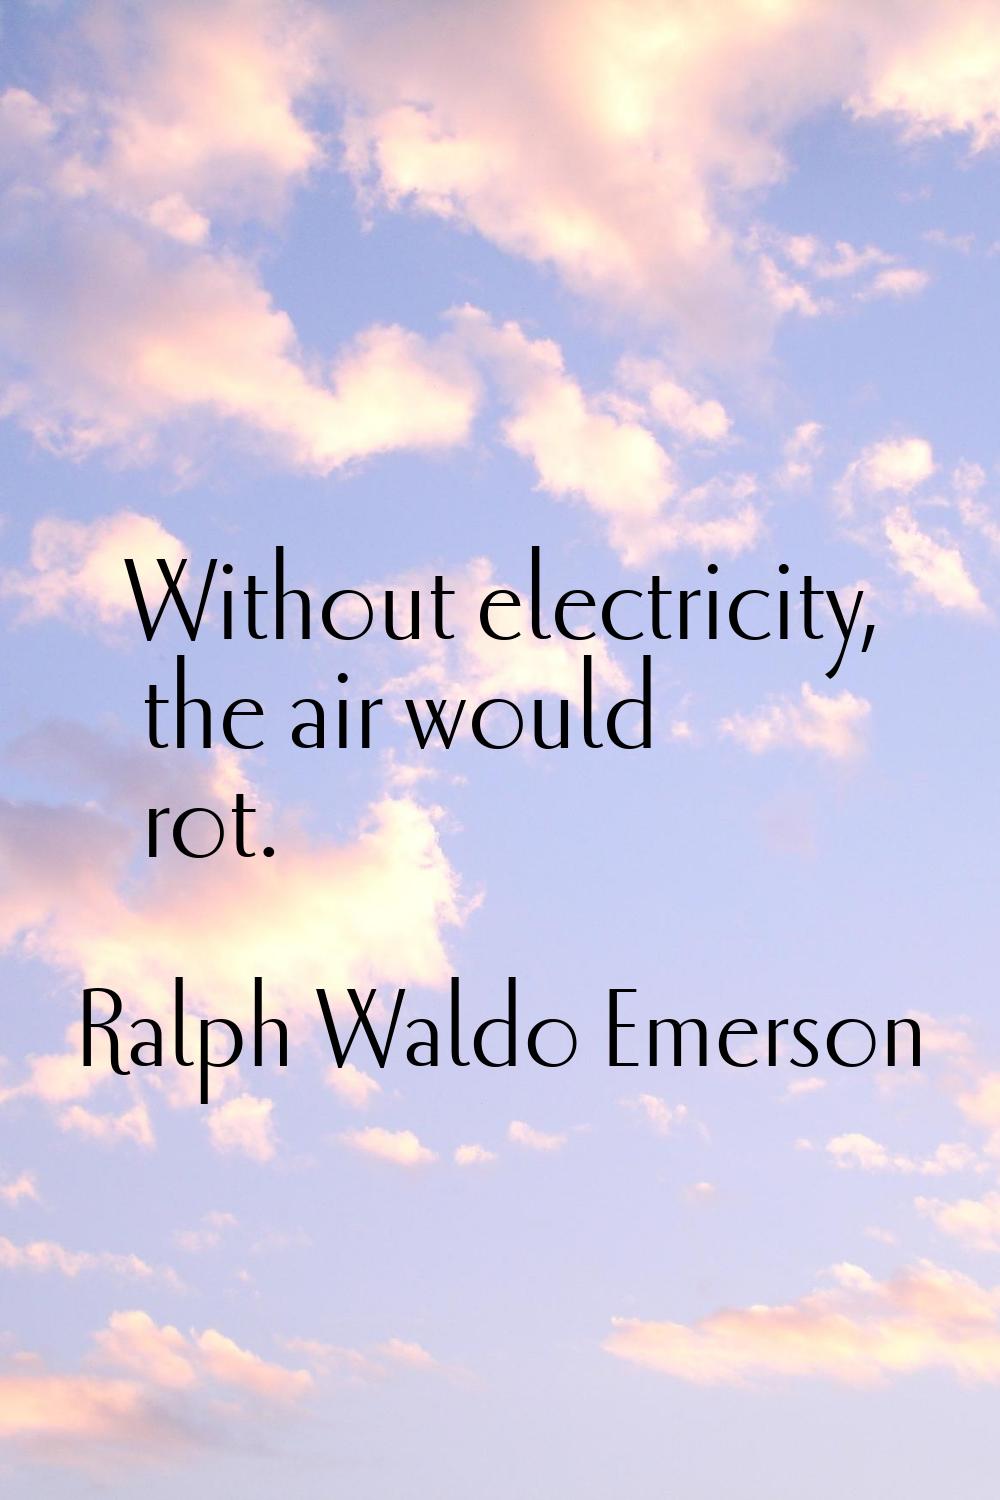 Without electricity, the air would rot.